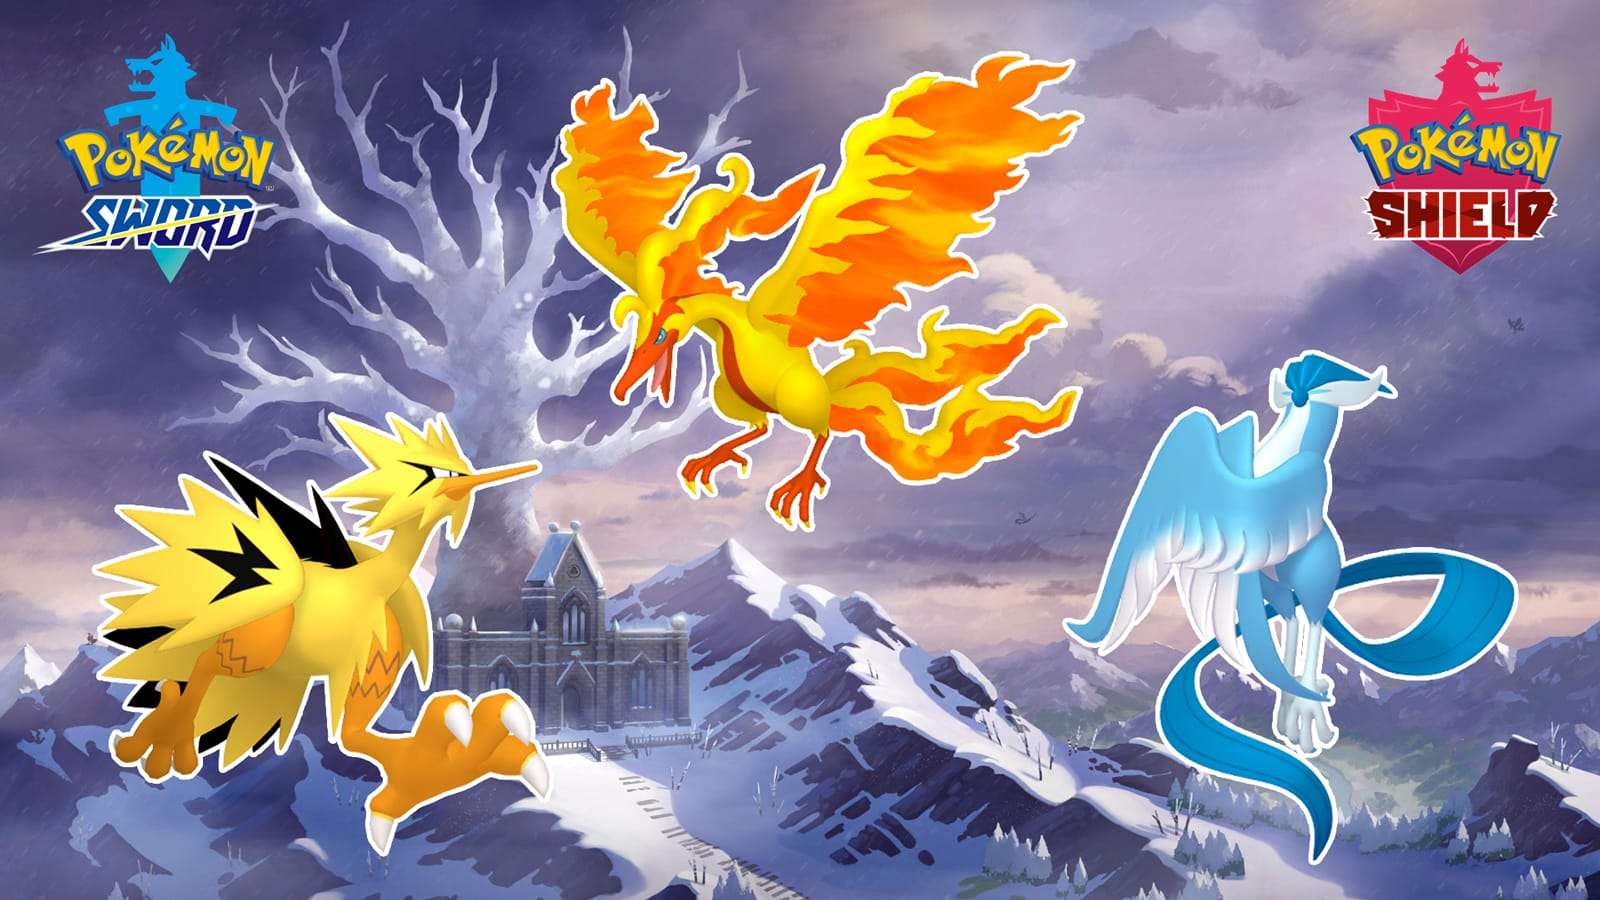 Shiny Galarian Zapdos, Moltes, and Articuno appearing in Pokemon Sword and Shield